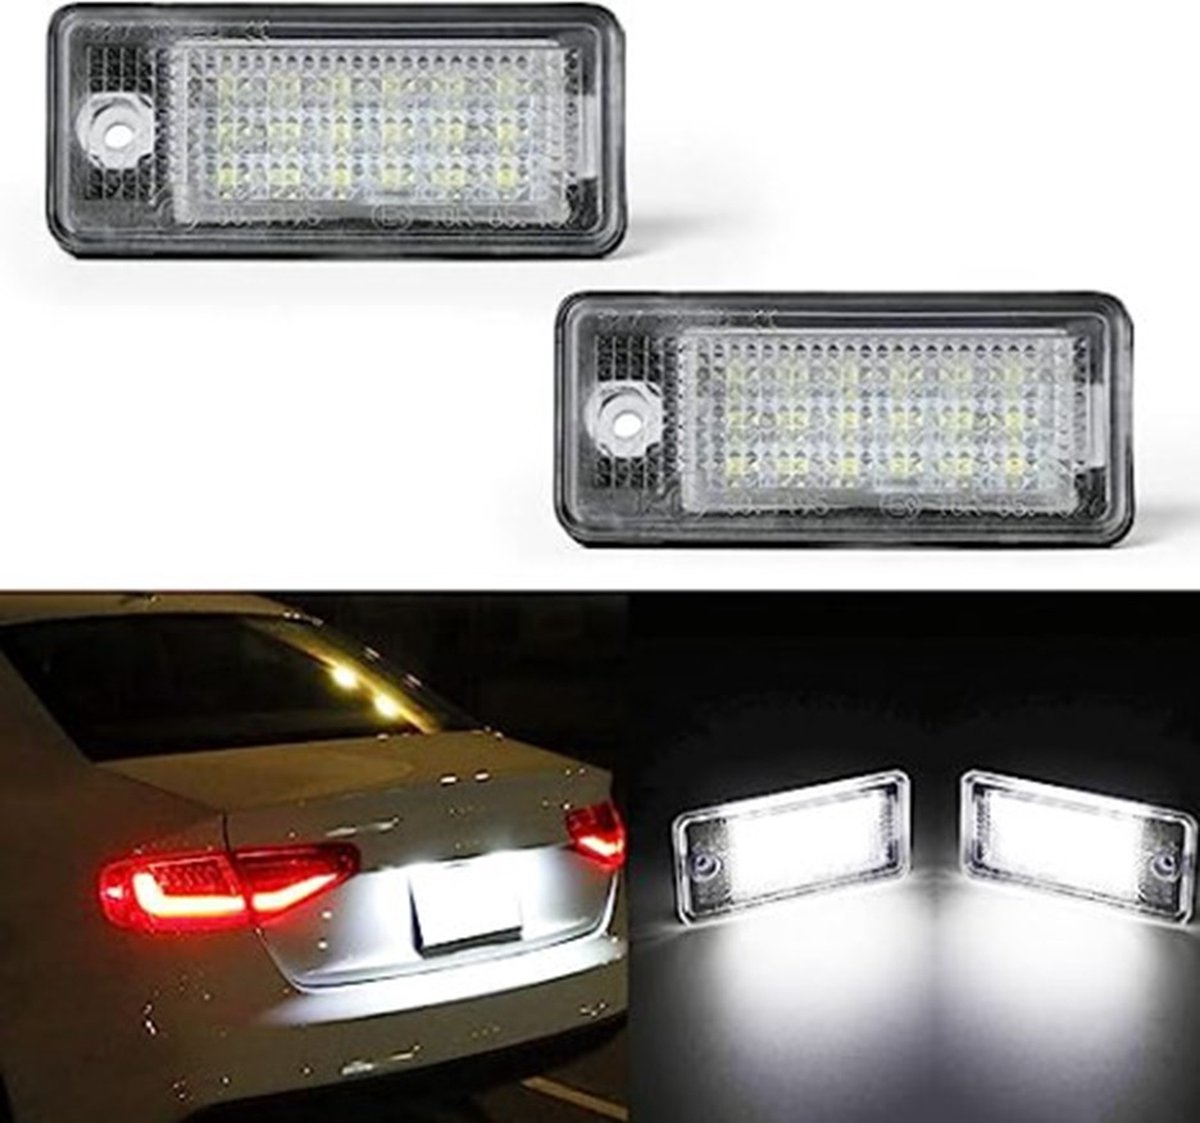 LED CANBUS Kentekenverlichting voor Audi A3 S3 RS3 Sportback A4 B7 S4 RS4 A5 S5 Cabrio A6 4F C6 RS6 Sedan Avant A8 S8 Q7